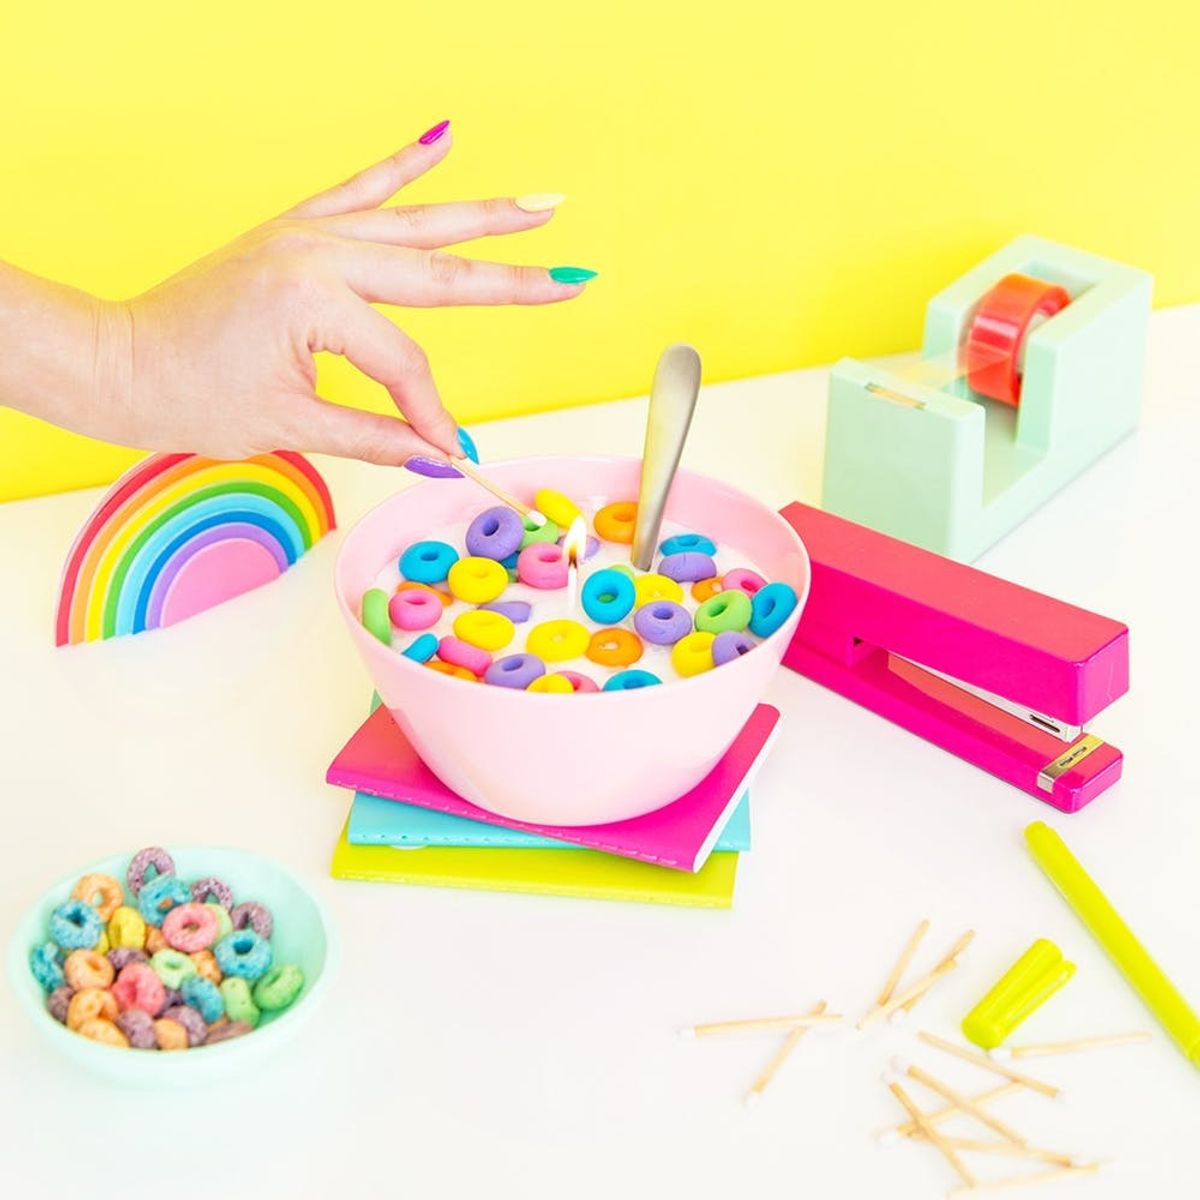 Cereal Bowl Candles, a Gelato Cooler, and More Summer Crafts to Make This Weekend